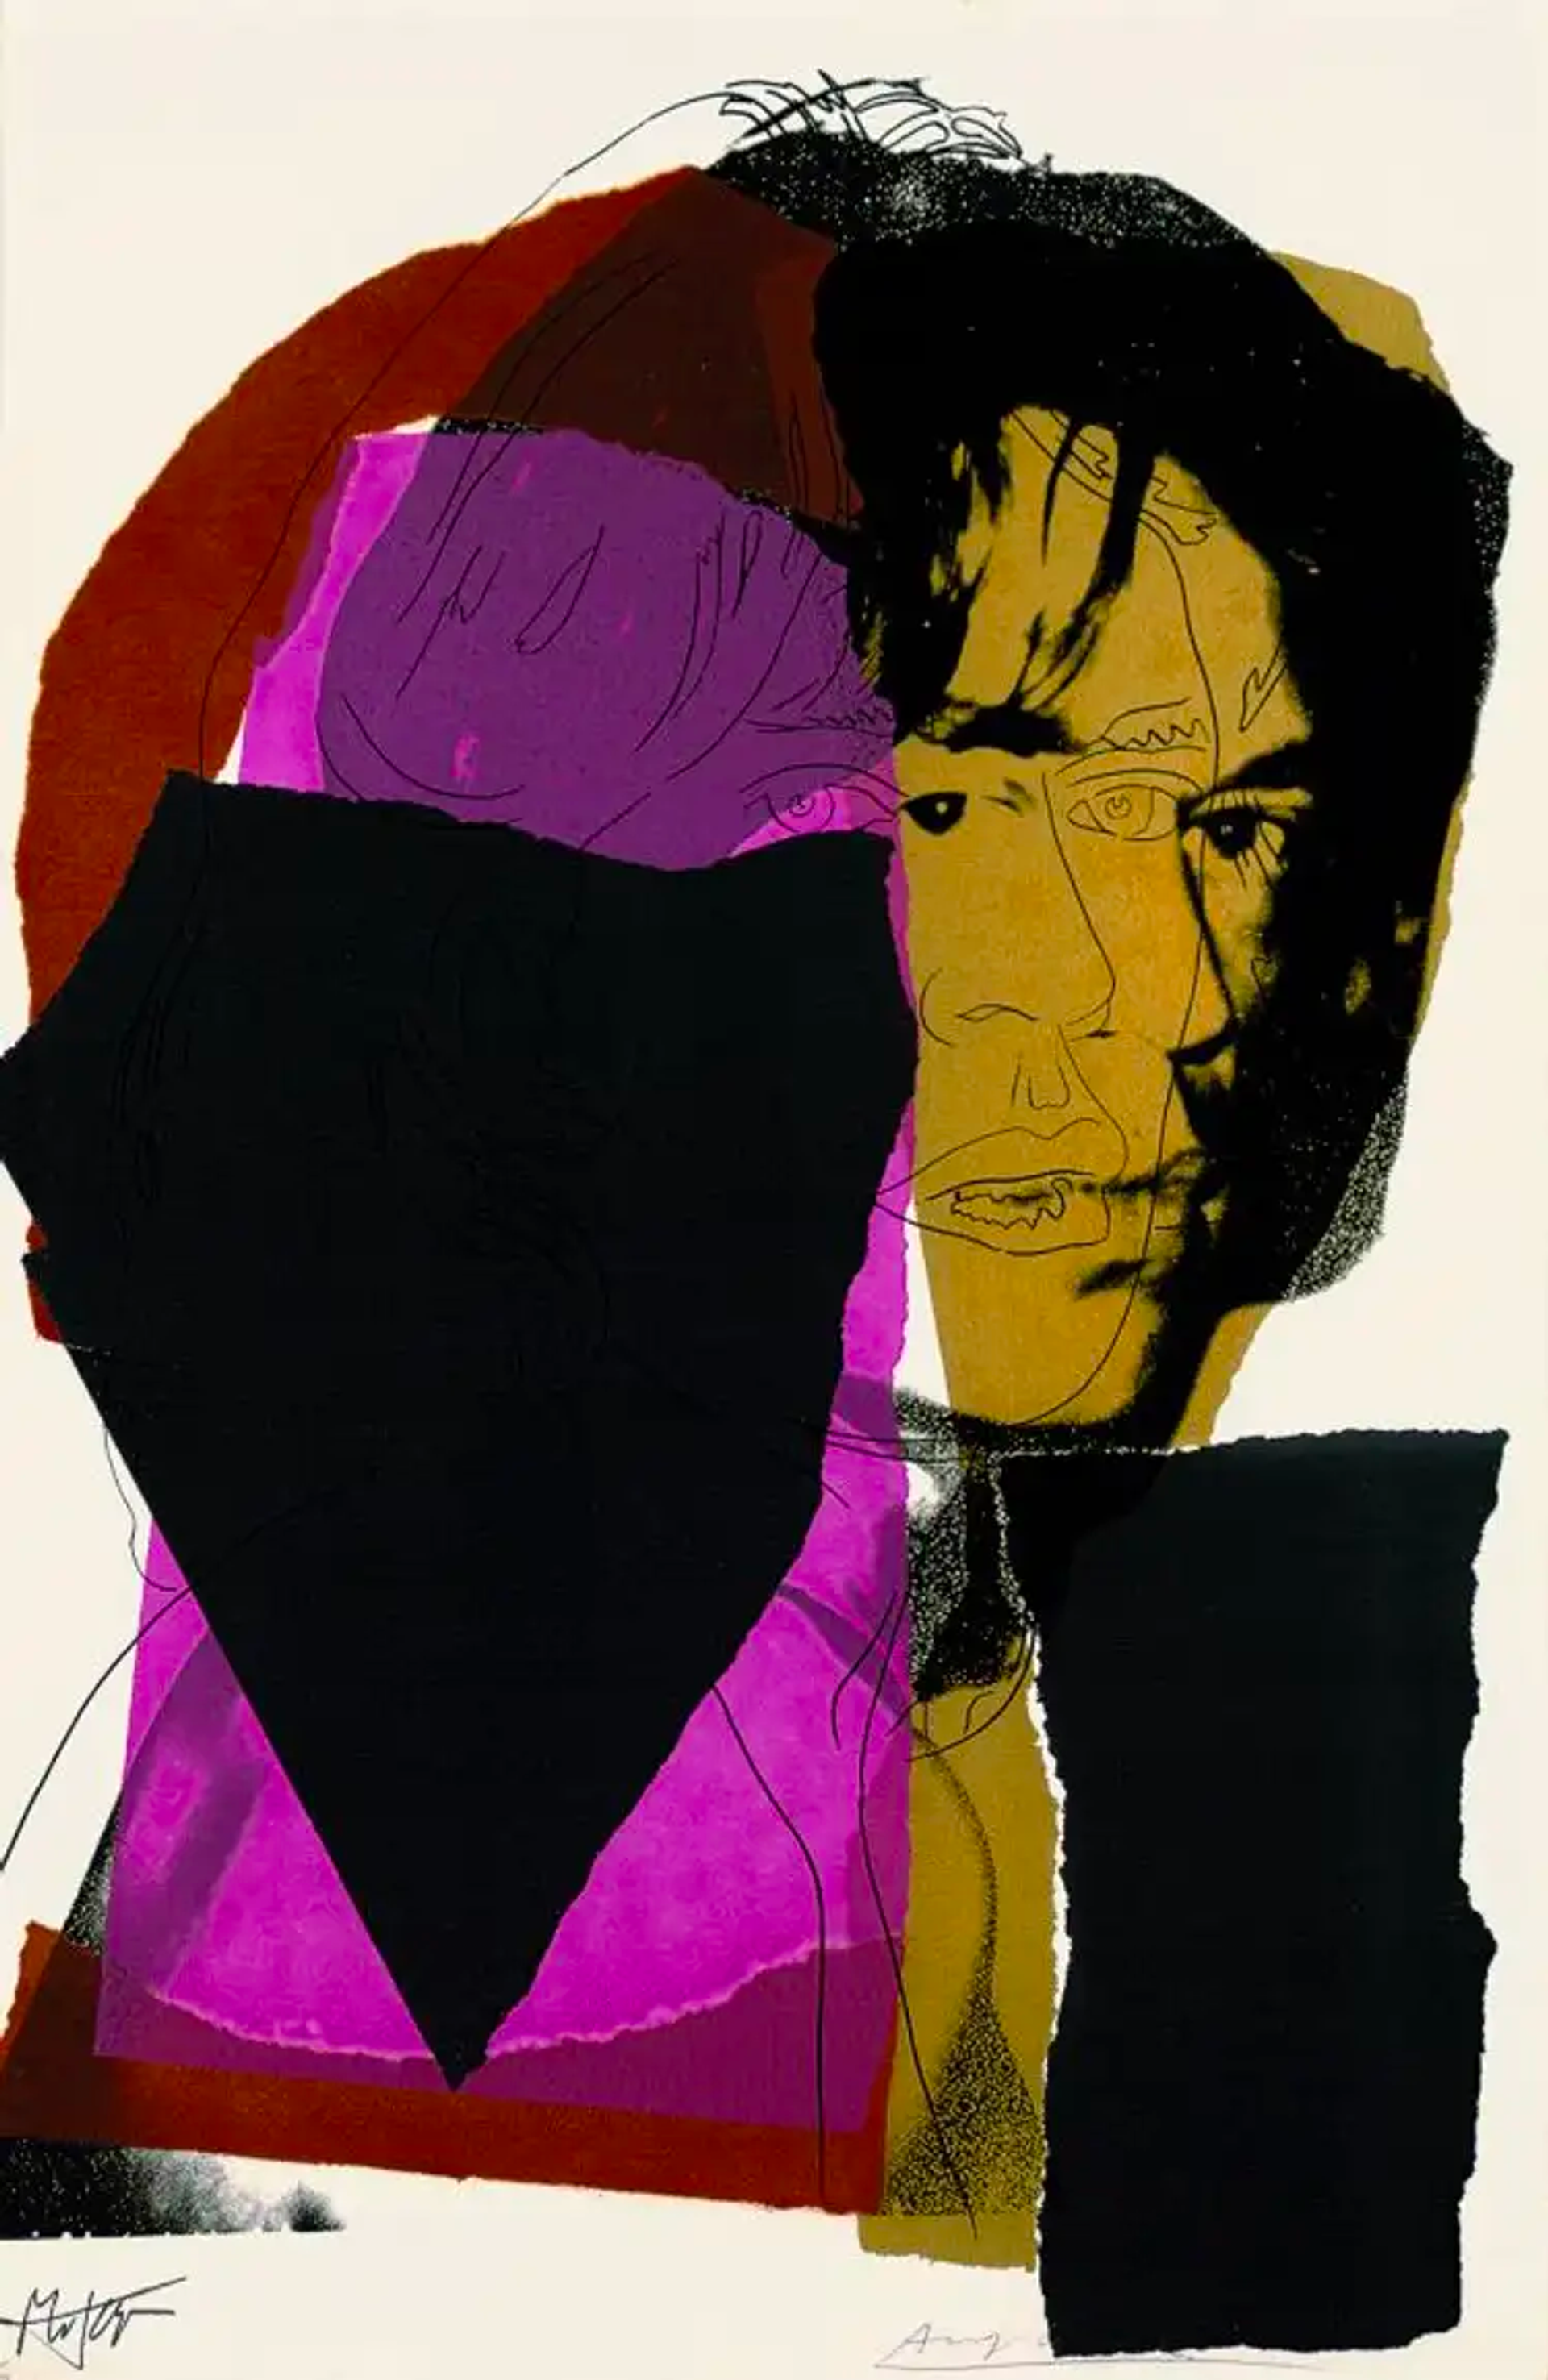 Screenprint artwork featuring a profile image of Mick Jagger, the lead singer of the Rolling Stones, depicted with abstracted pink, gold, and black color blocks